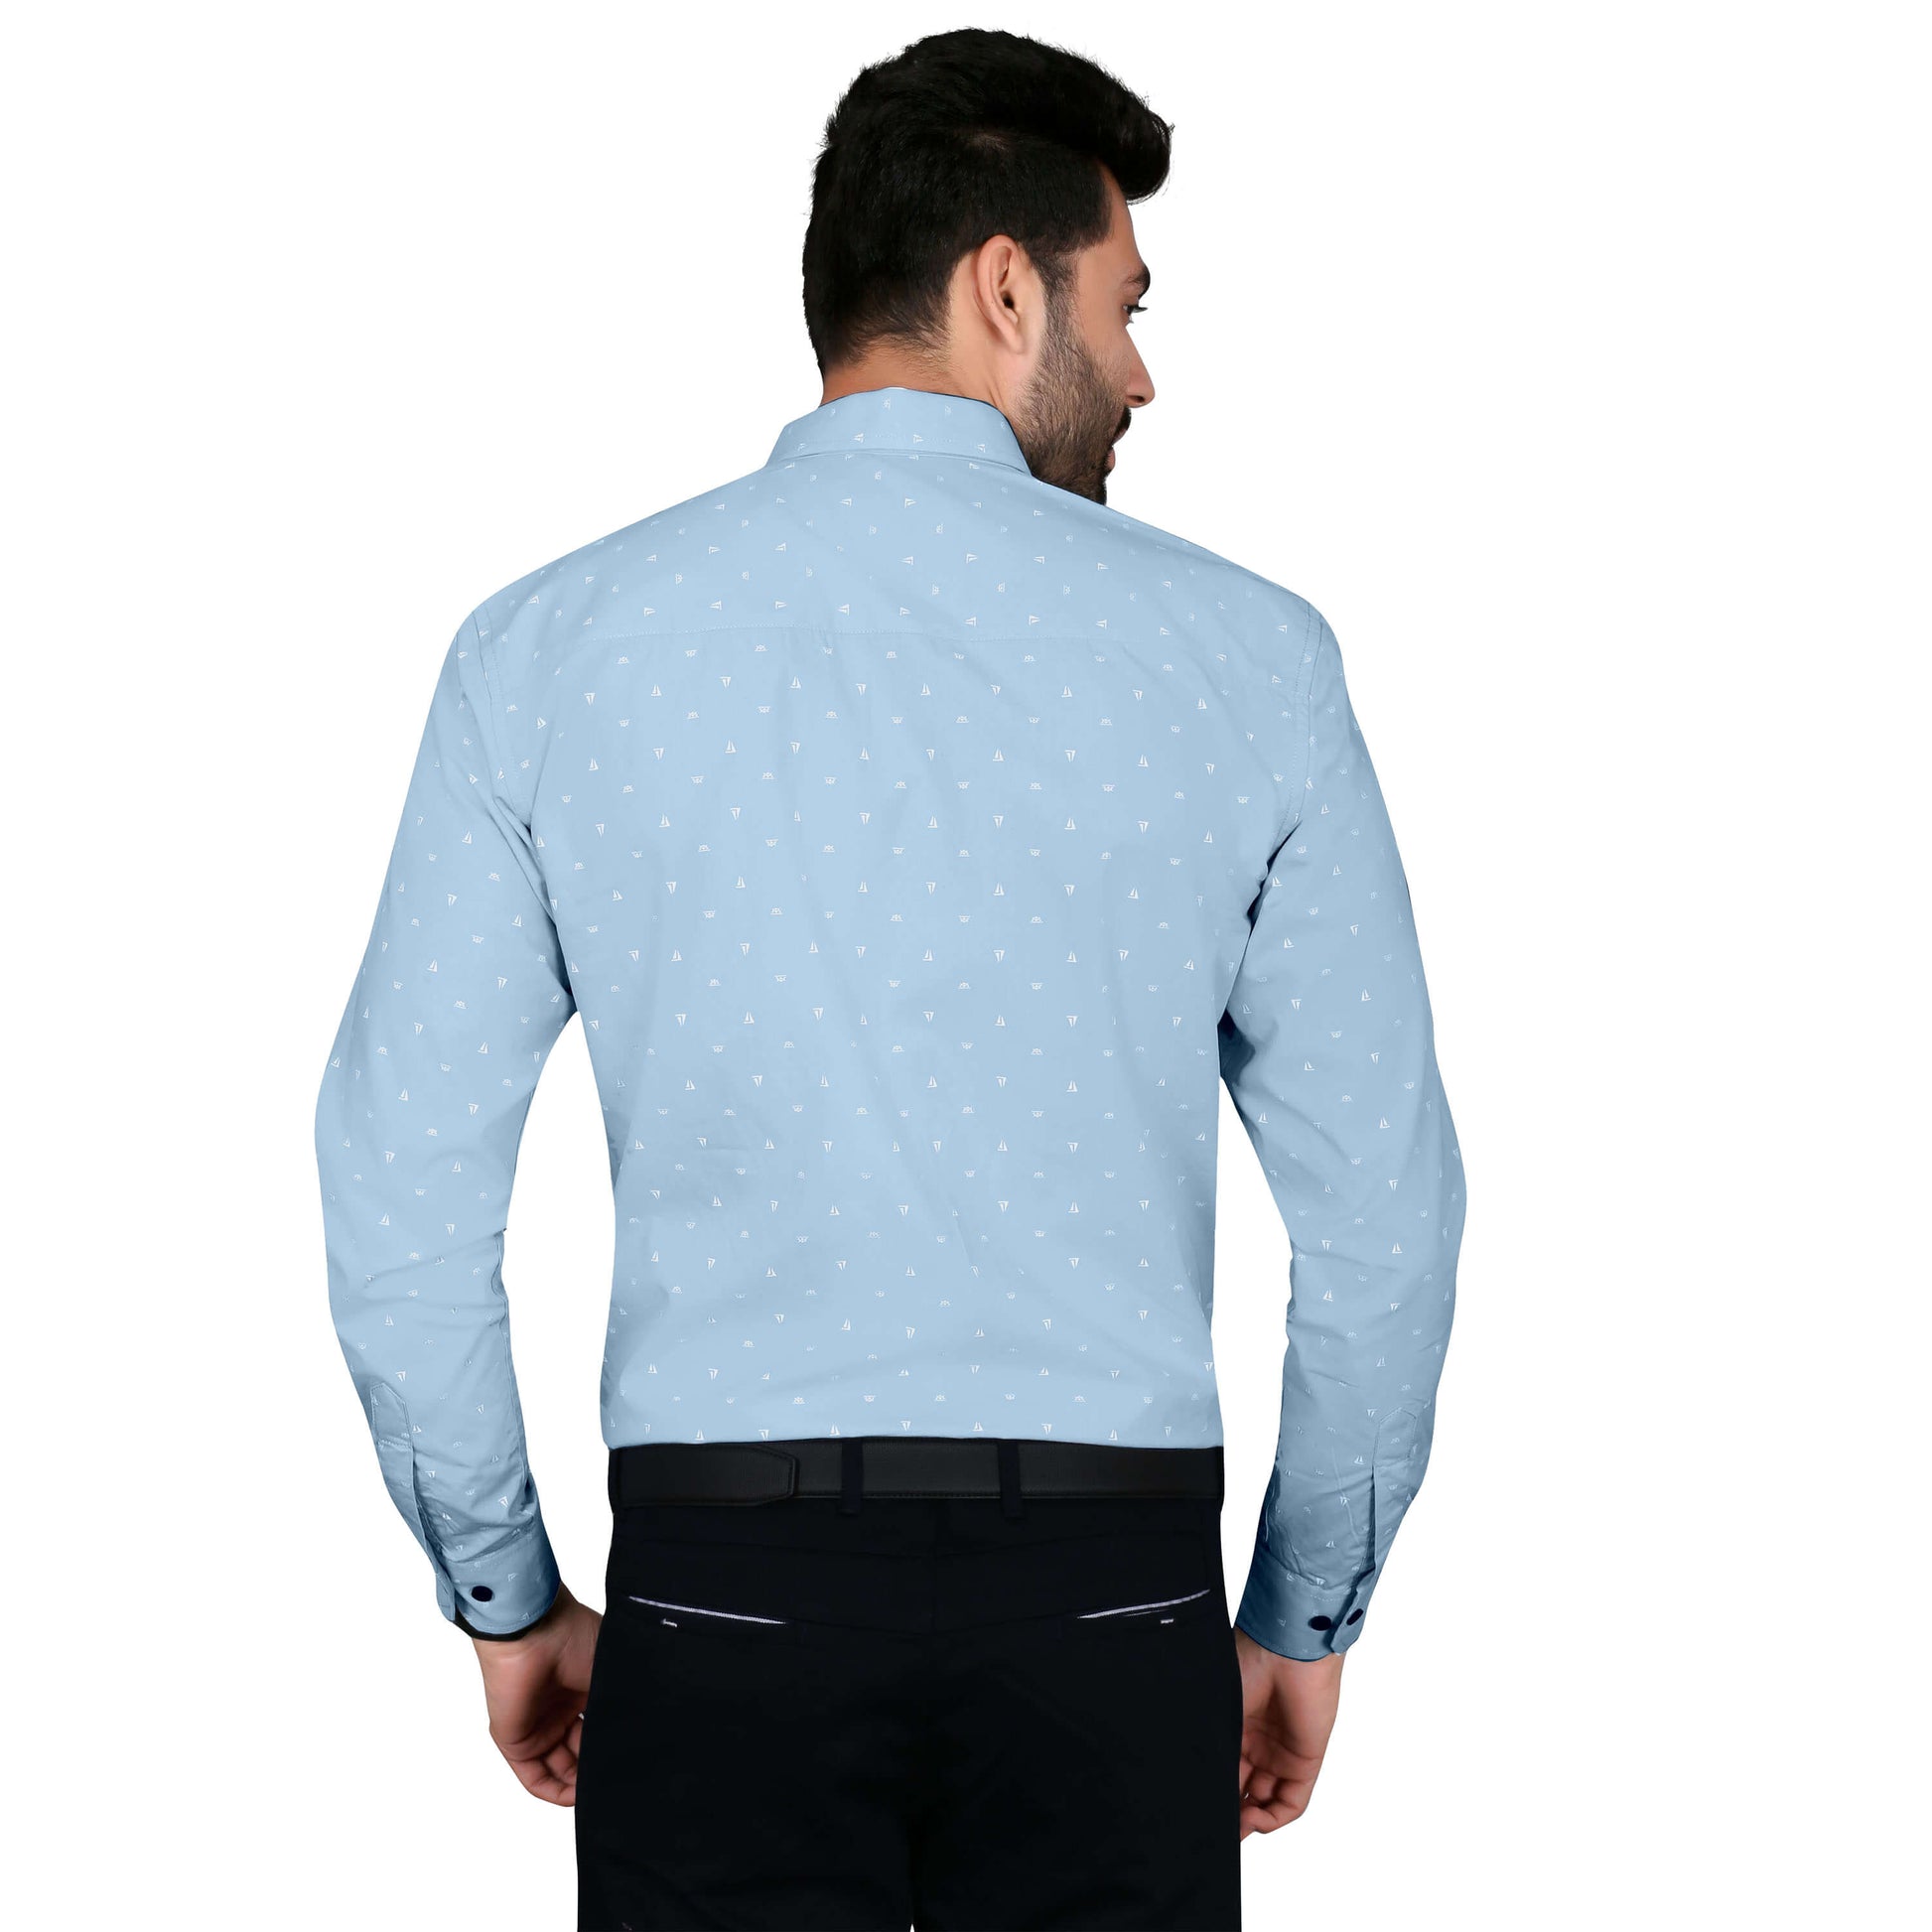 5thanfold Men's Formal Pure Cotton Full Sleeve Printed Sky Blue Slim Fit Shirt